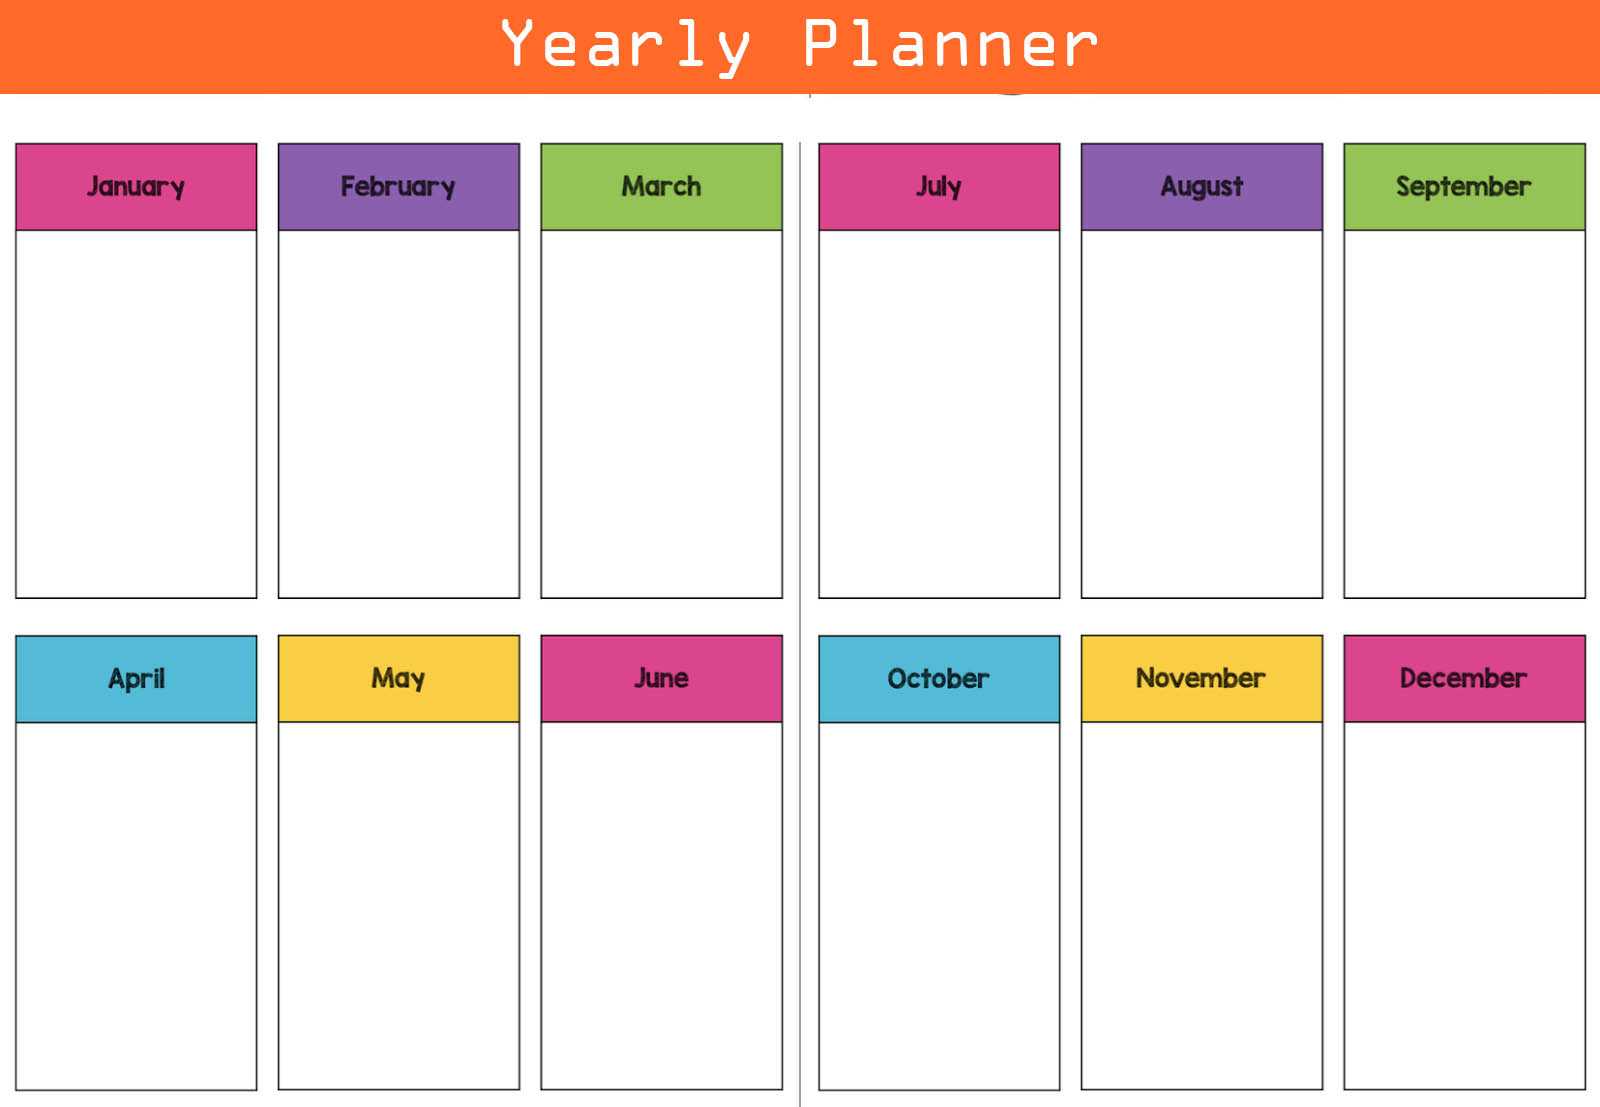 Yearly Planner for Business